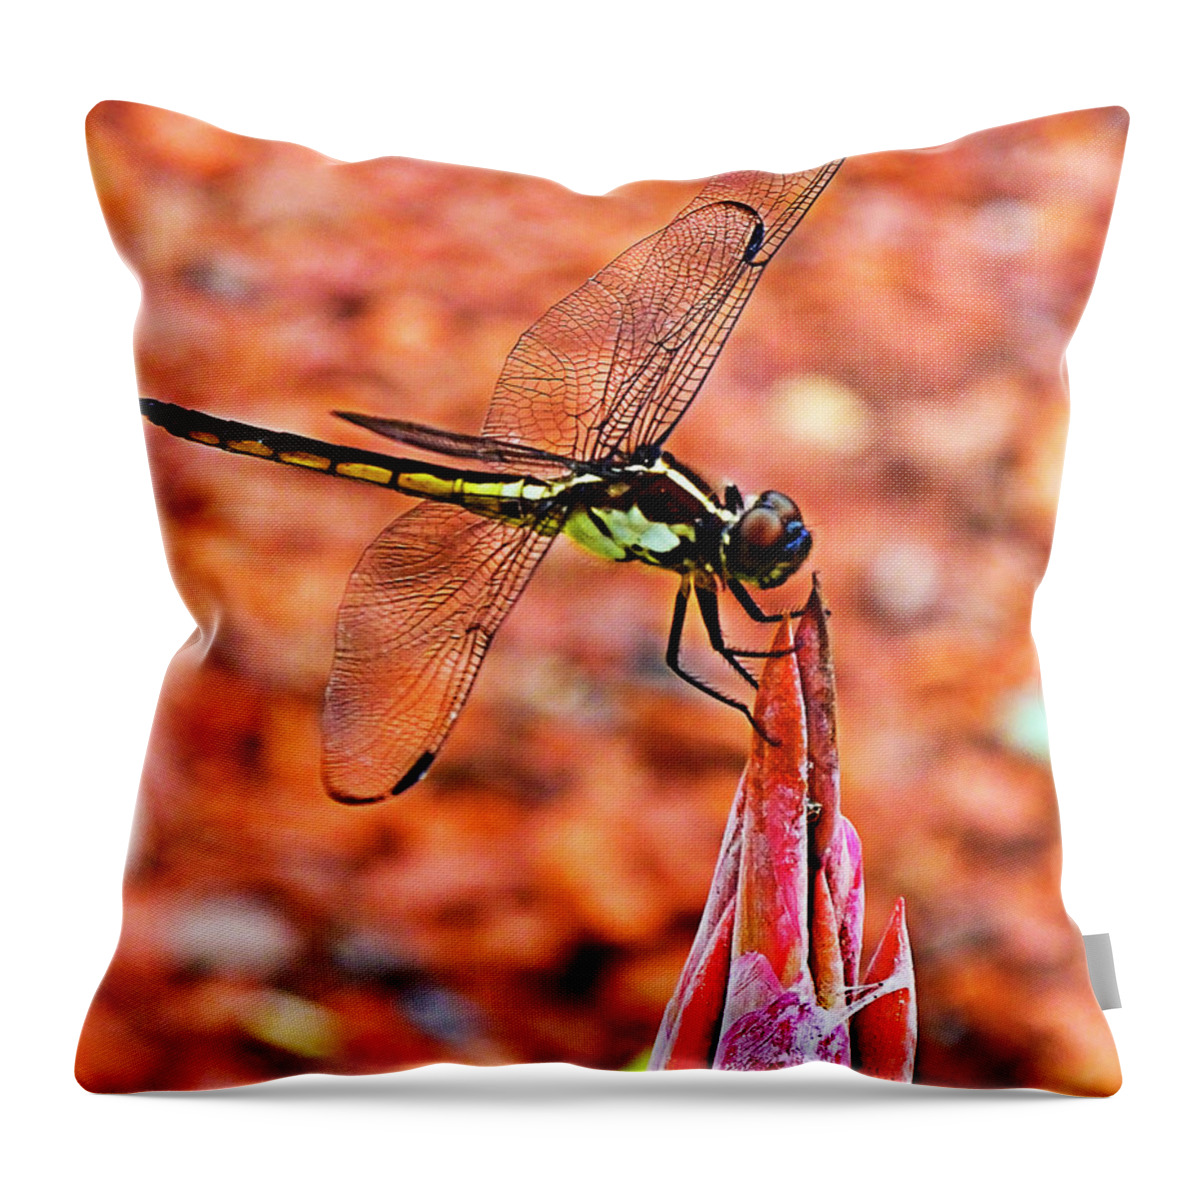 Dragonfly Throw Pillow featuring the photograph Lovely Dragonfly by Bill Barber